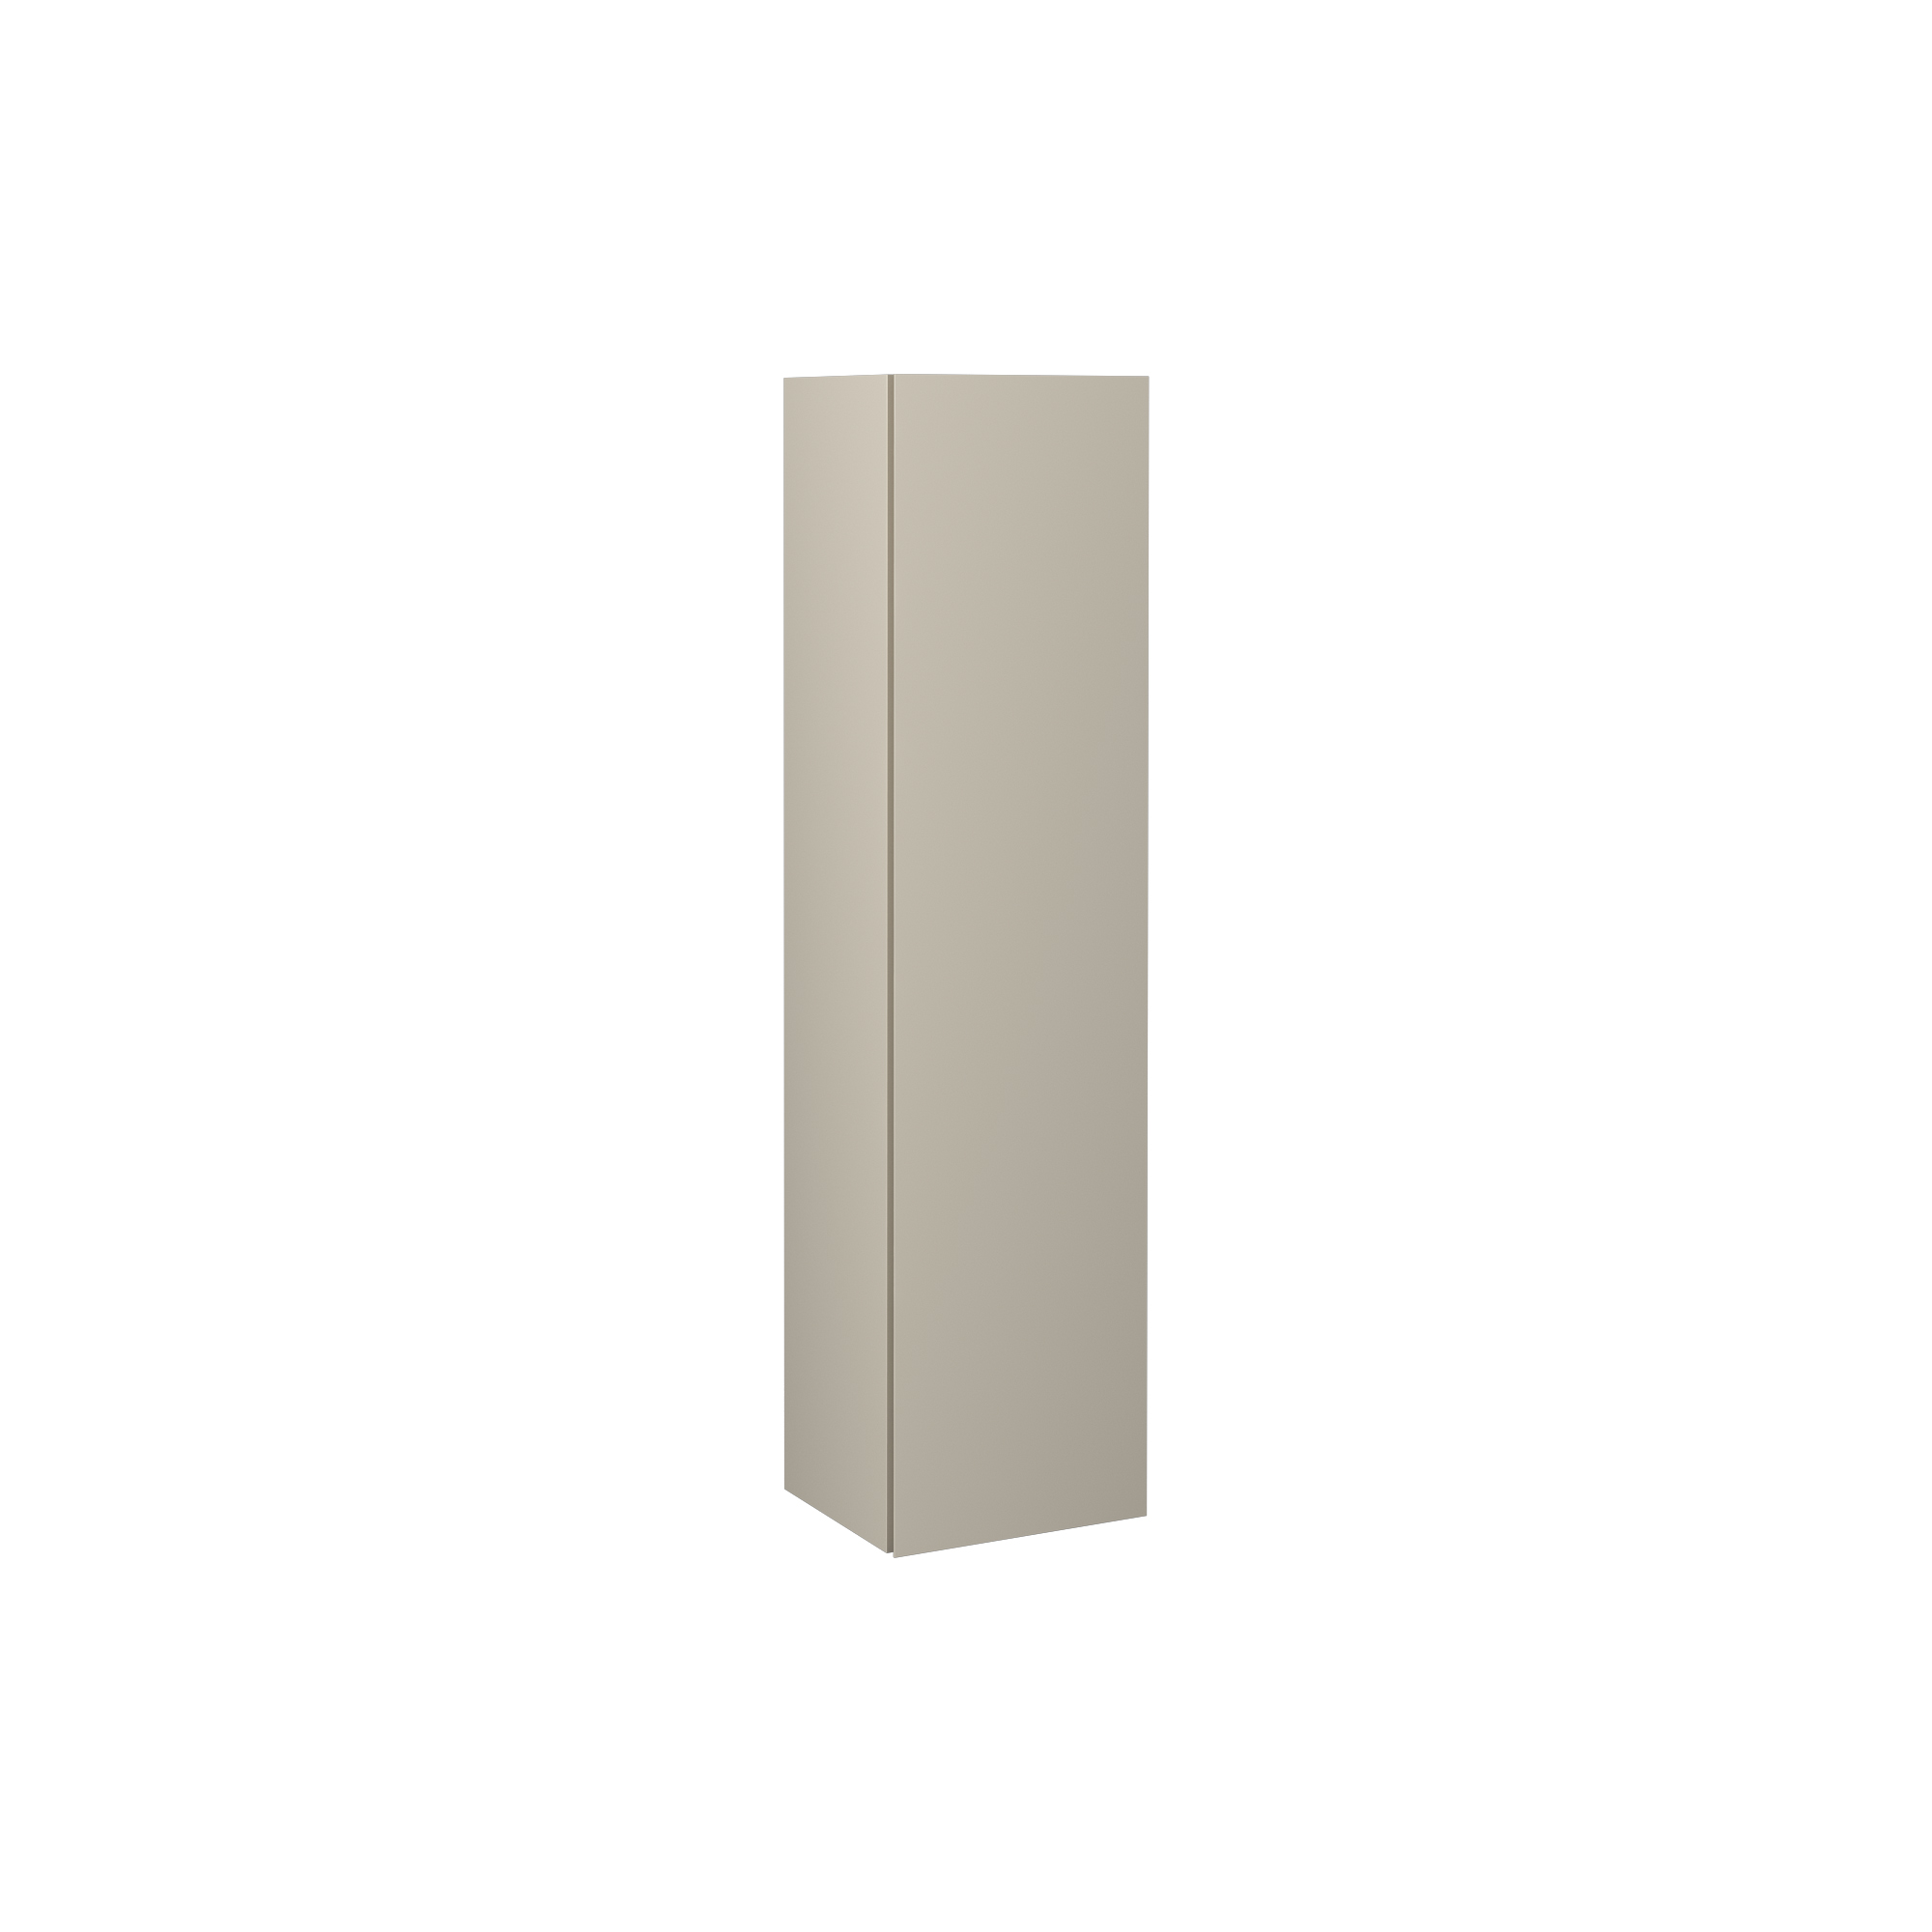 Pro 14" Tall Cabinet, Sand Beige Right